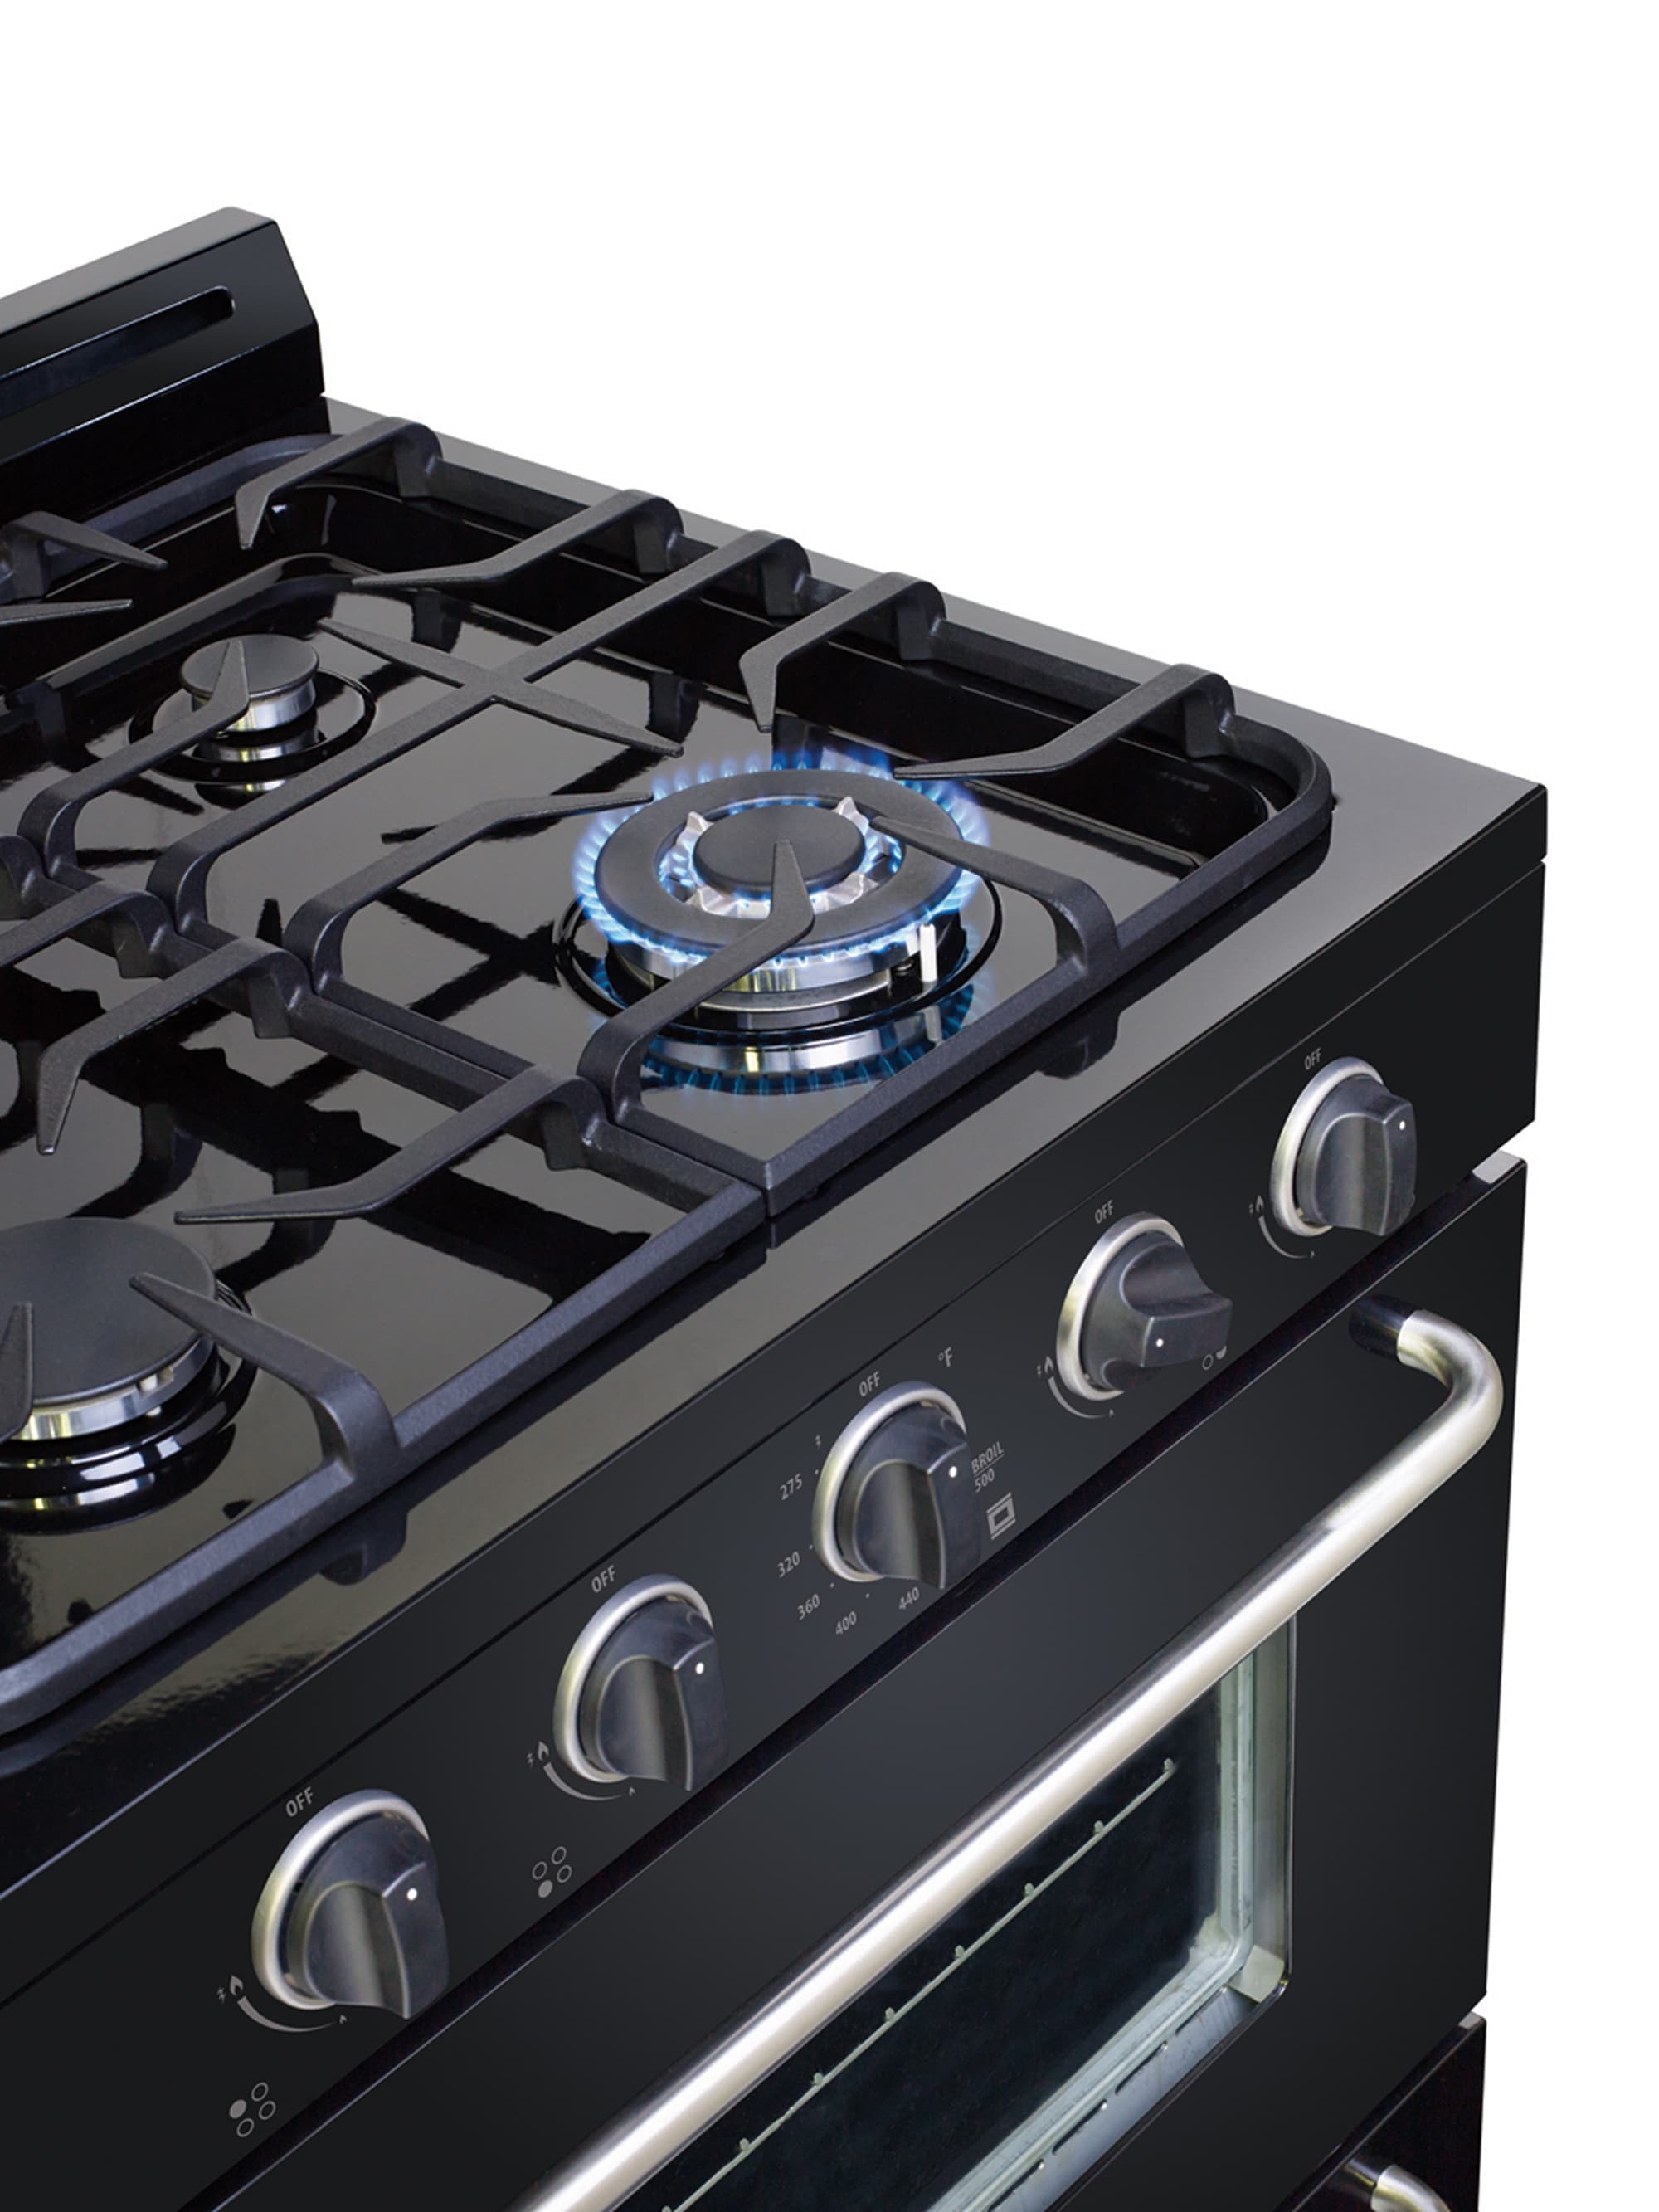 Unique Off-Grid 30-in 4 Burners 3.9-cu ft Freestanding Liquid Propane GAS Range (Stainless Steel) | UGP-30G of2 S/S